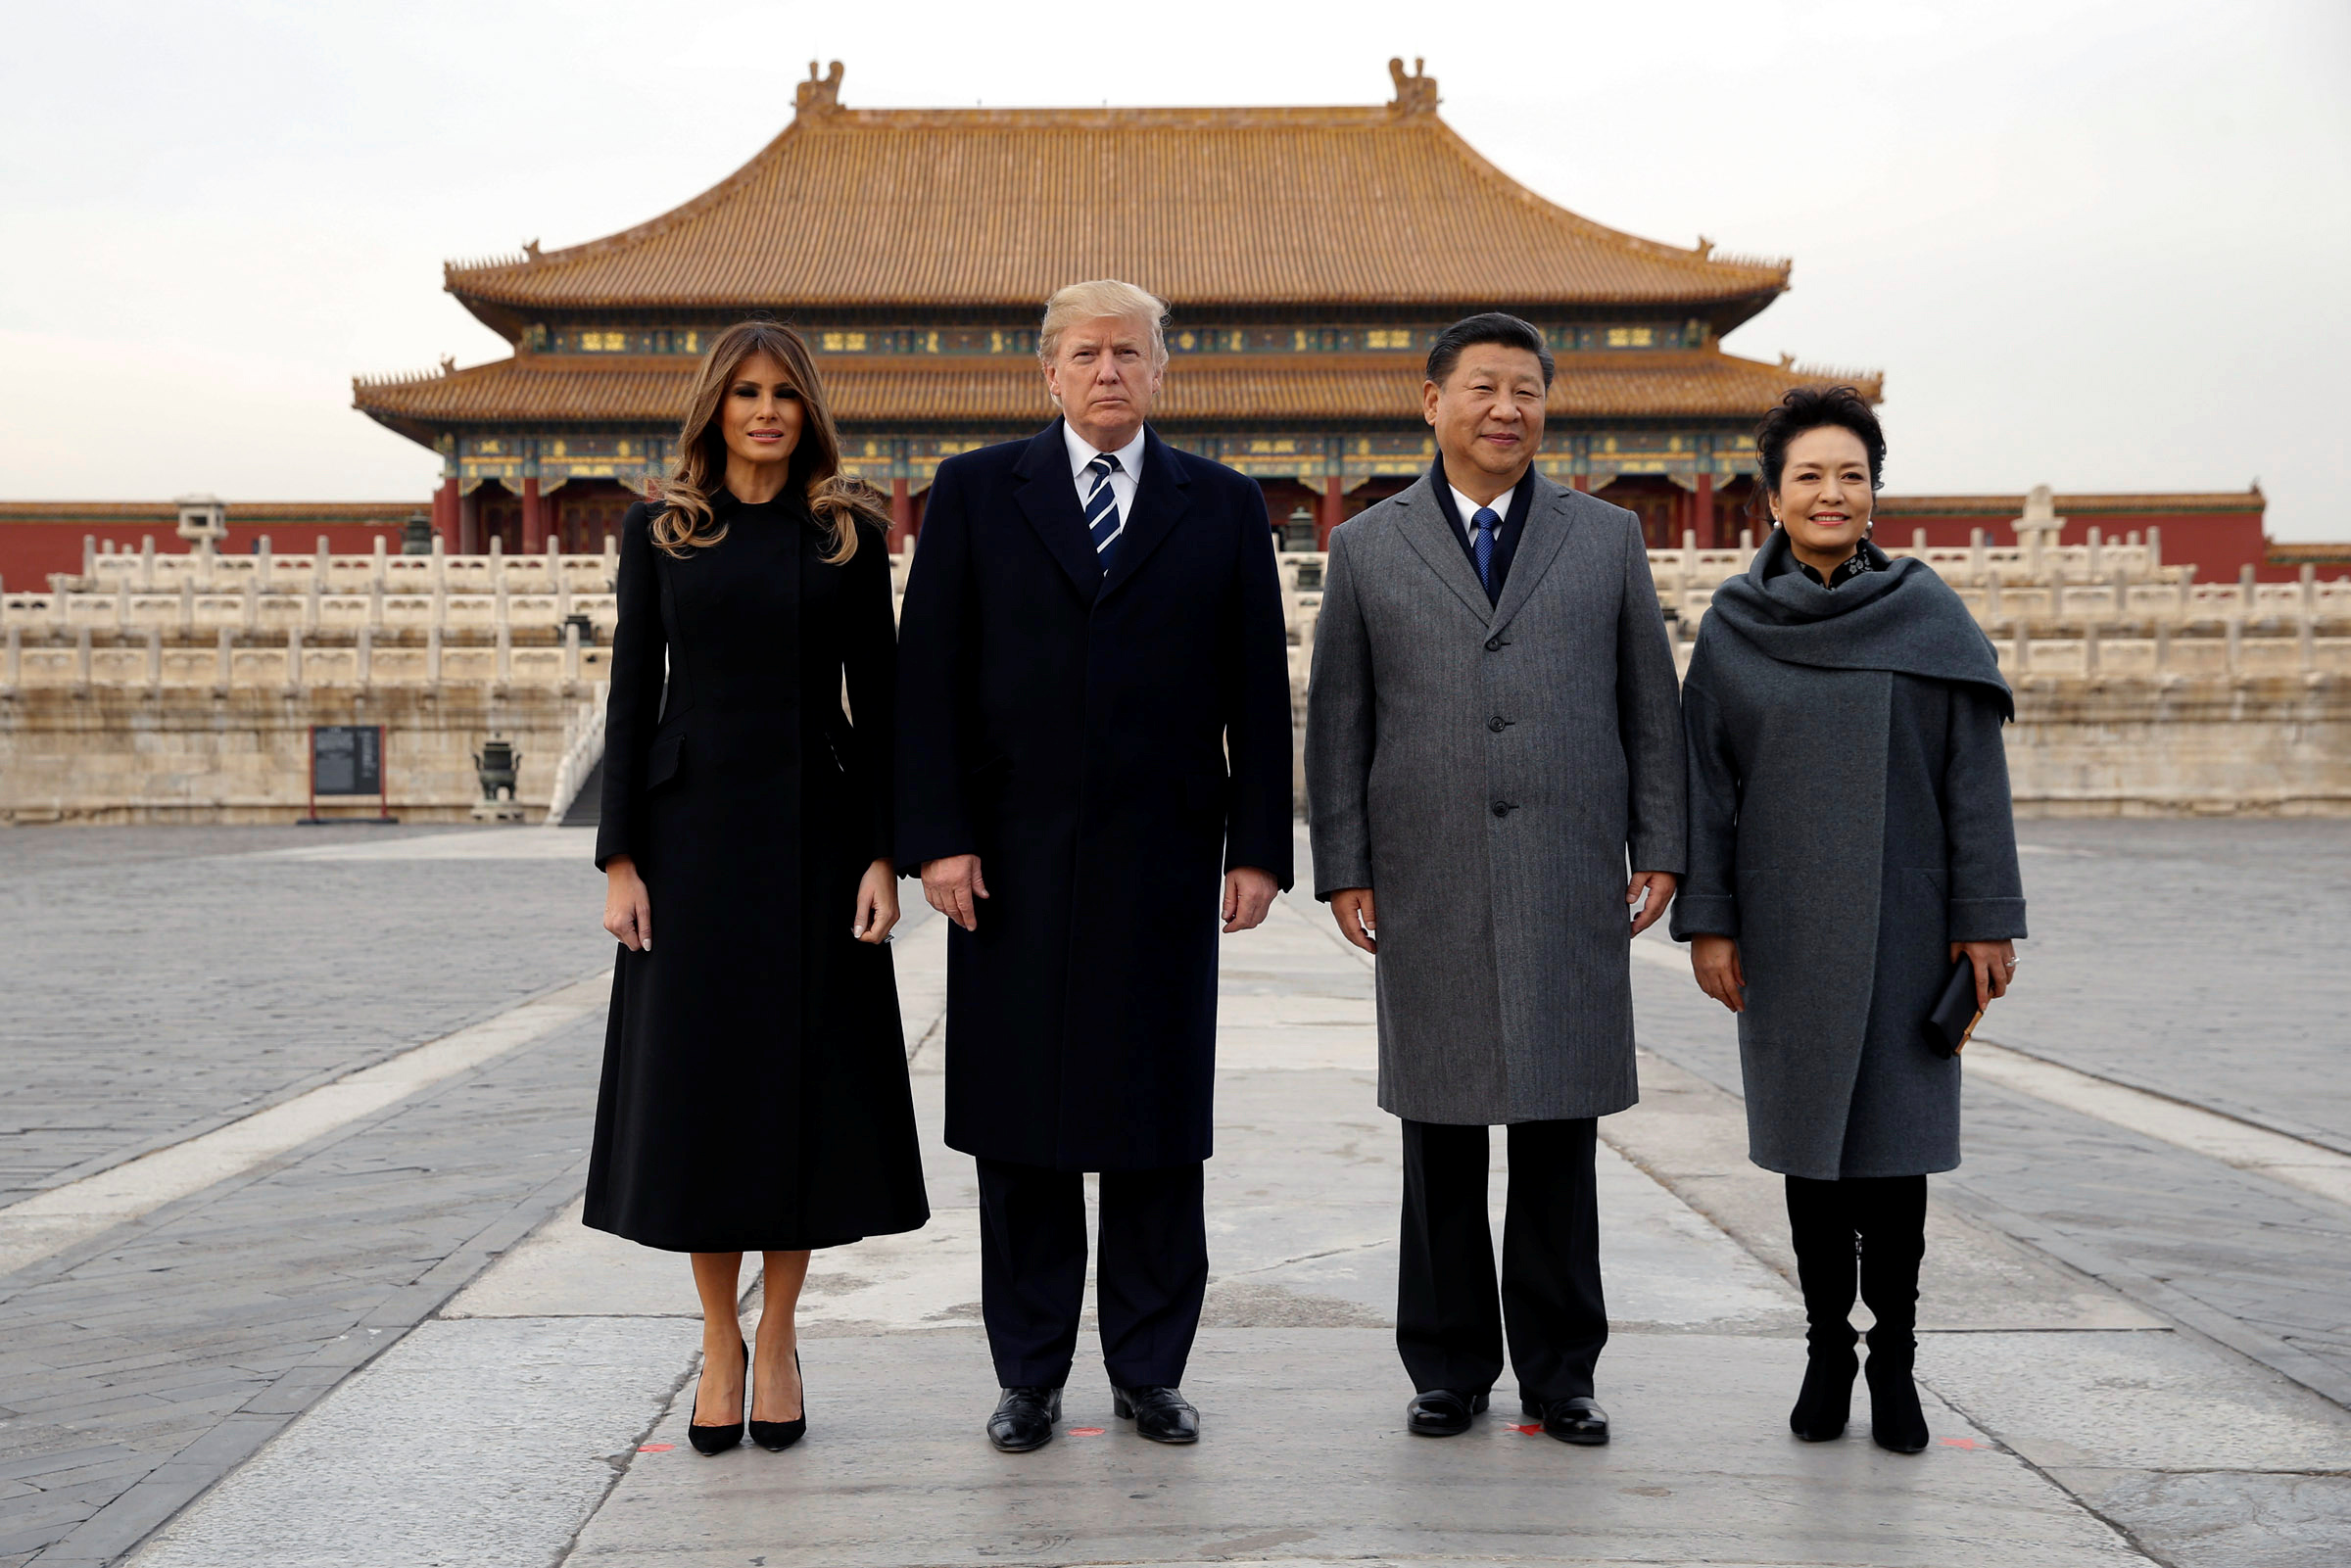 U.S. President Donald Trump and U.S. first lady Melania visit the Forbidden City with China's President Xi Jinping and China's First Lady Peng Liyuan in Beijing, China, November 8, 2017. REUTERS/Jonathan Ernst - RC13C8D168D0